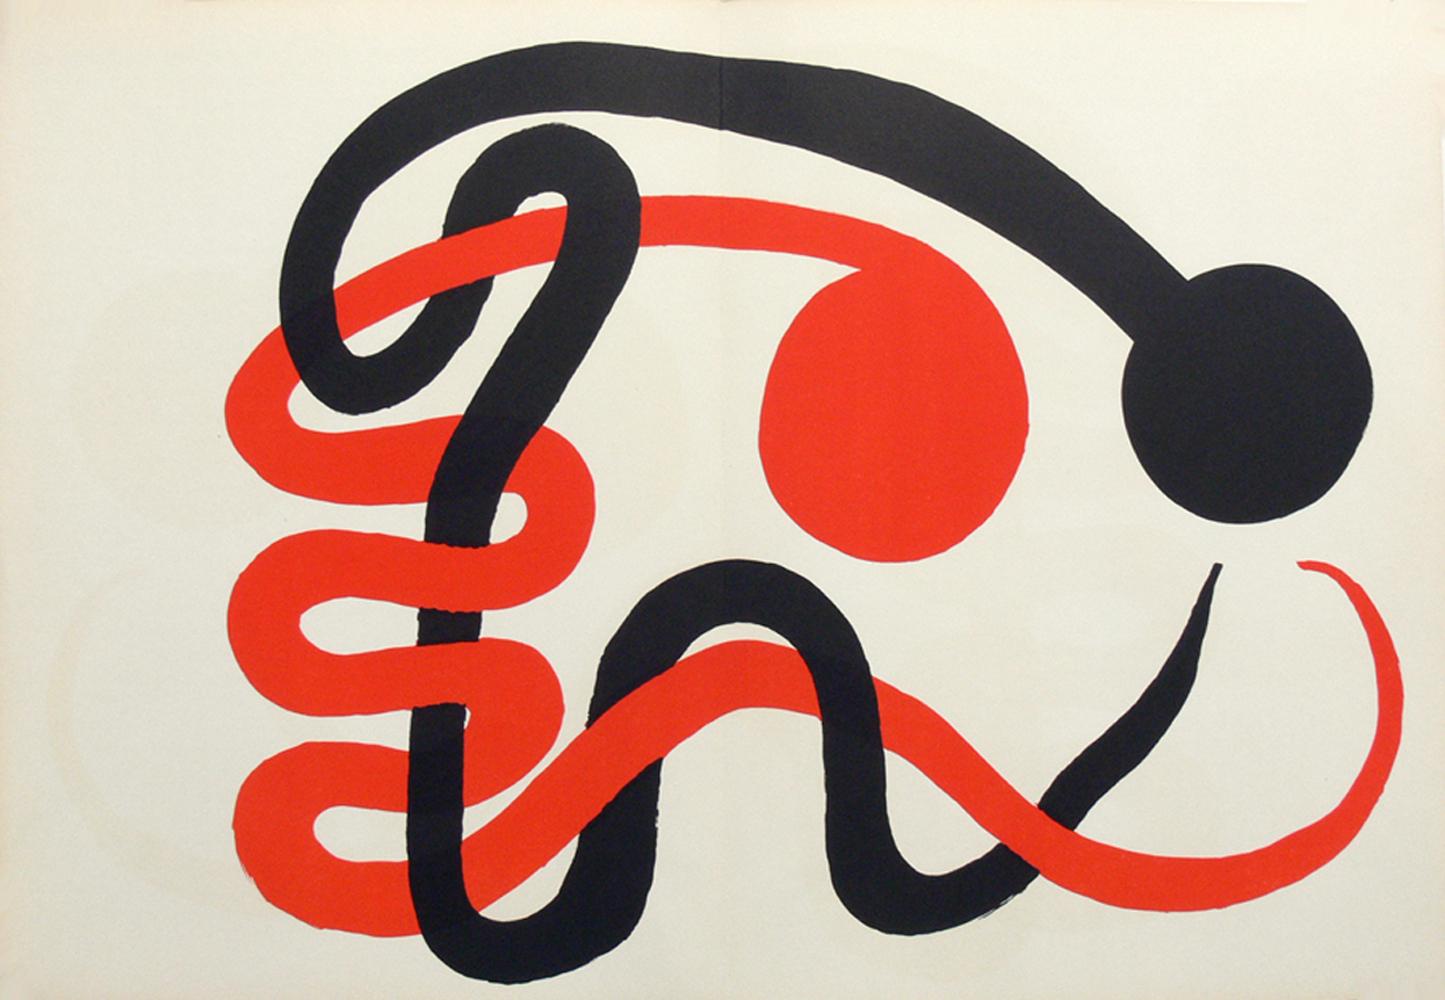 Selection of Alexander Calder color lithographs, France, circa 1960s. We purchased a group of these color lithographs from the estate of a couple that lived in France from 1951-1983. These are most likely from the limited edition folio “Derriere le